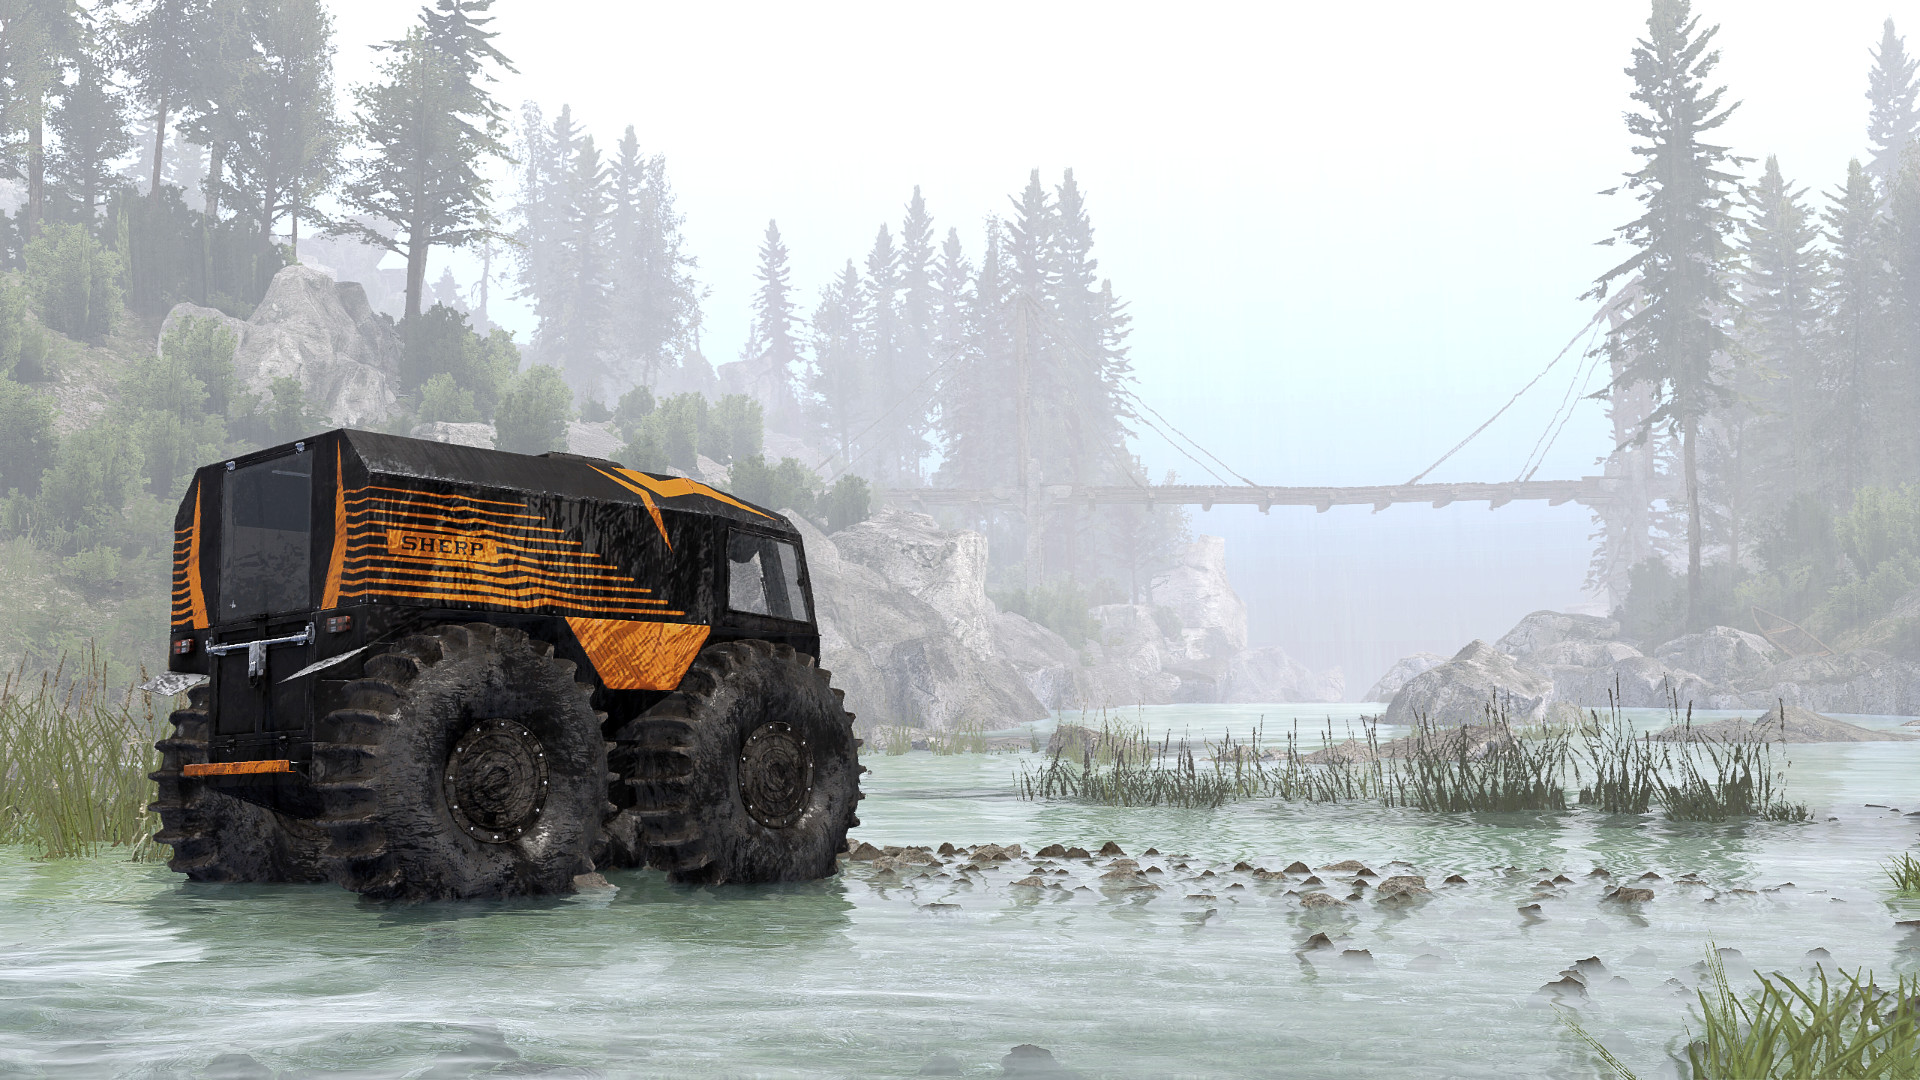 The Spintires SHERP Ural Challenge DLC And Update V1.6.0 are both out now